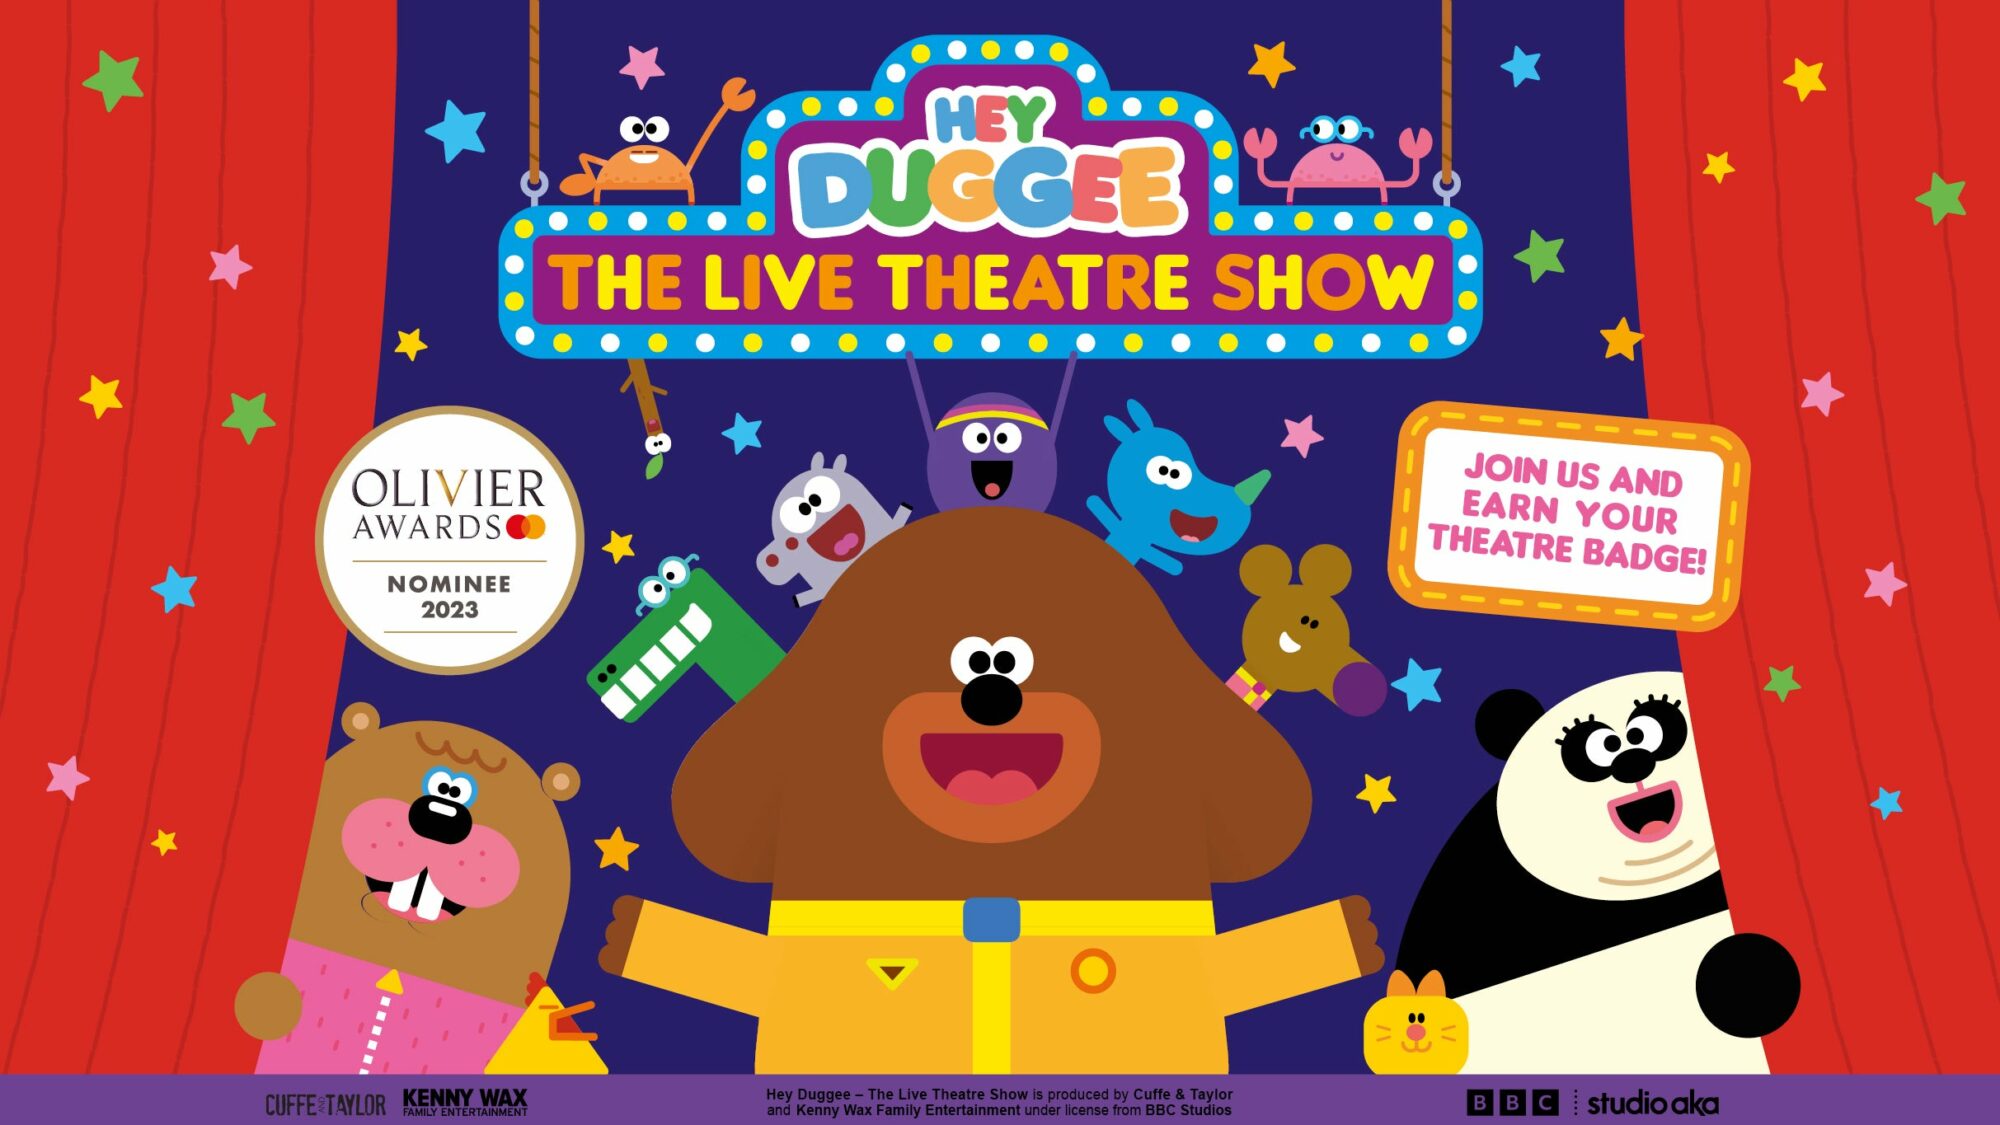 Image name HEY DUGGEE The Live Theatre Show at Leeds Grand Theatre Leeds the 25 image from the post HEY DUGGEE - The Live Theatre Show at Leeds Grand Theatre, Leeds in Yorkshire.com.